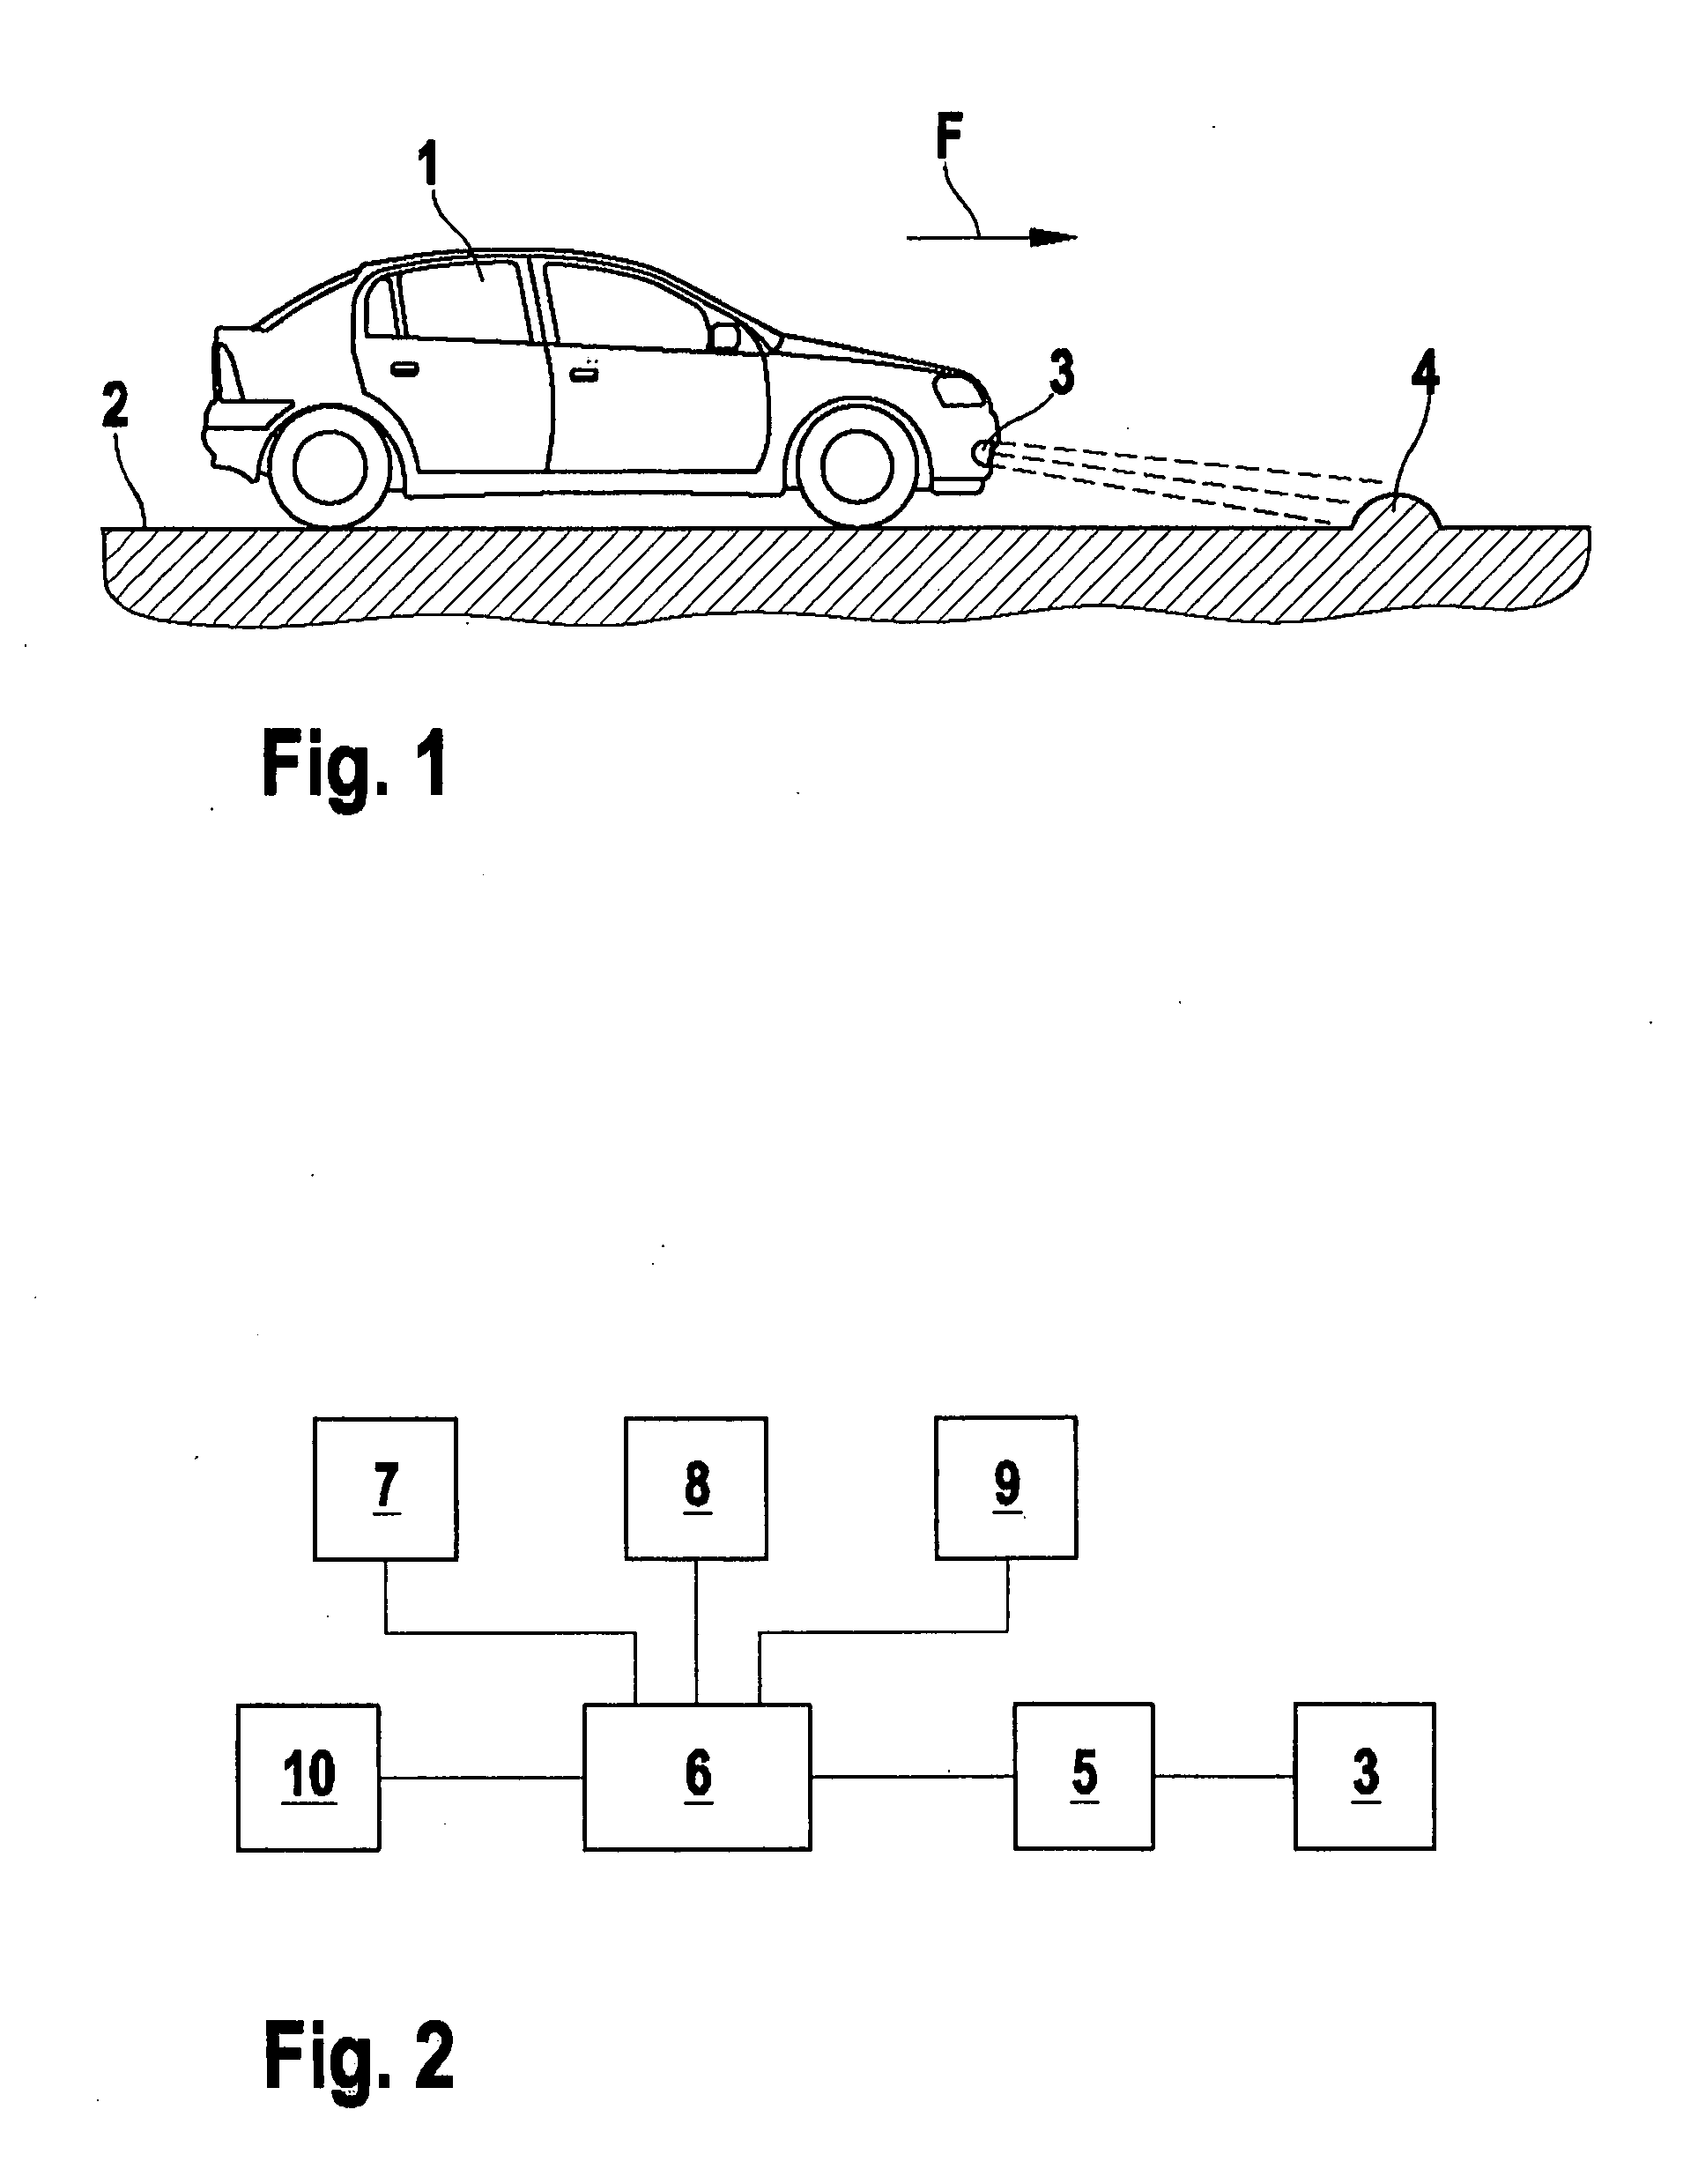 Method and system for assisting the driver of a motor vehicle in identifying road bumps